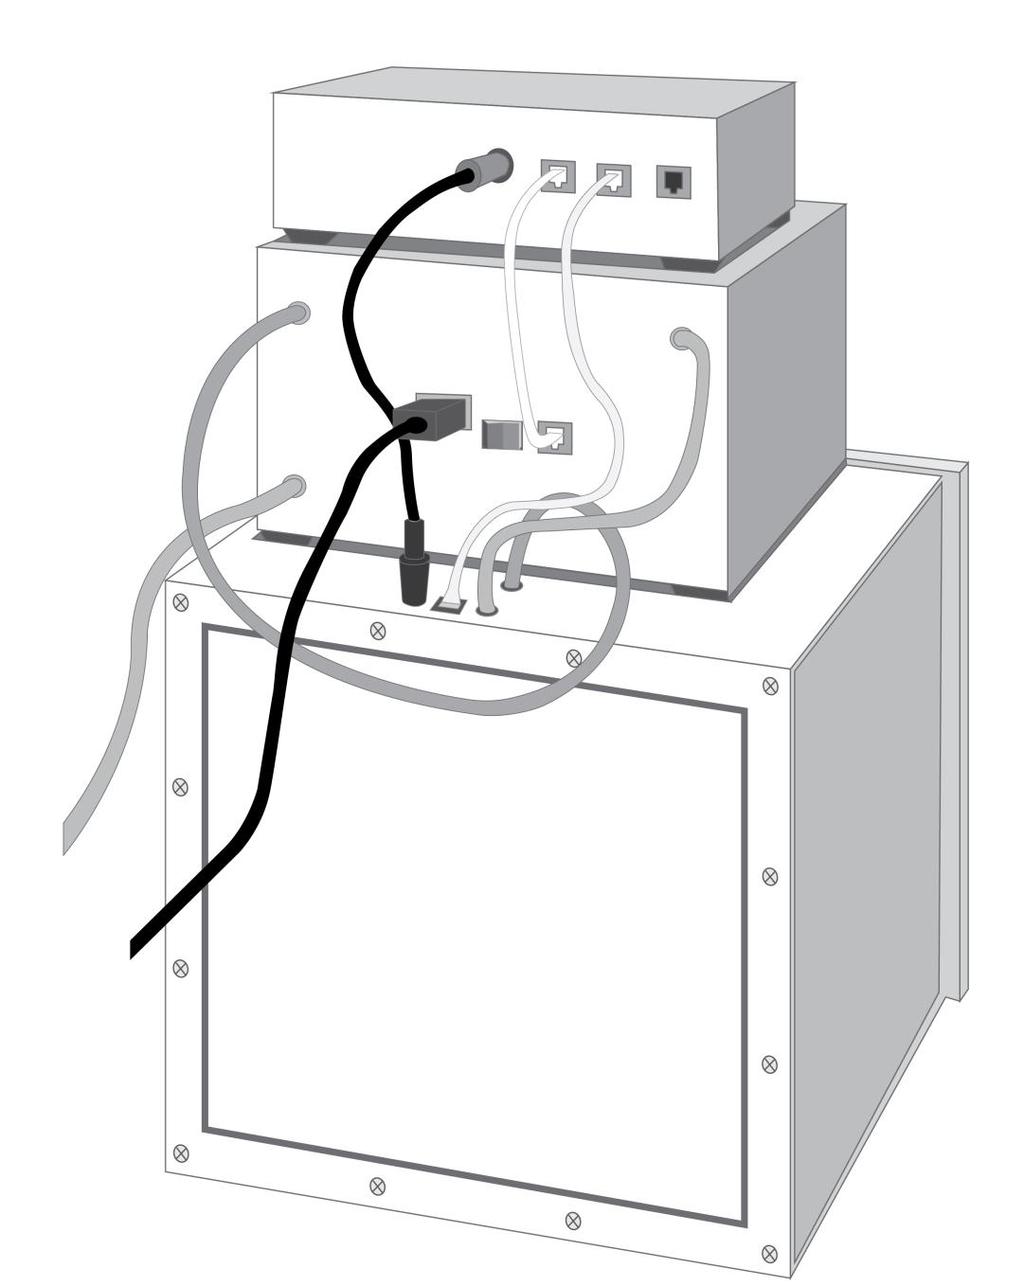 NitroWatch Set-Up (Rear View) 1. Use ¼ tubing to connect the Internal Pressure inlet and Gas Out port to the desiccator as shown. 2.